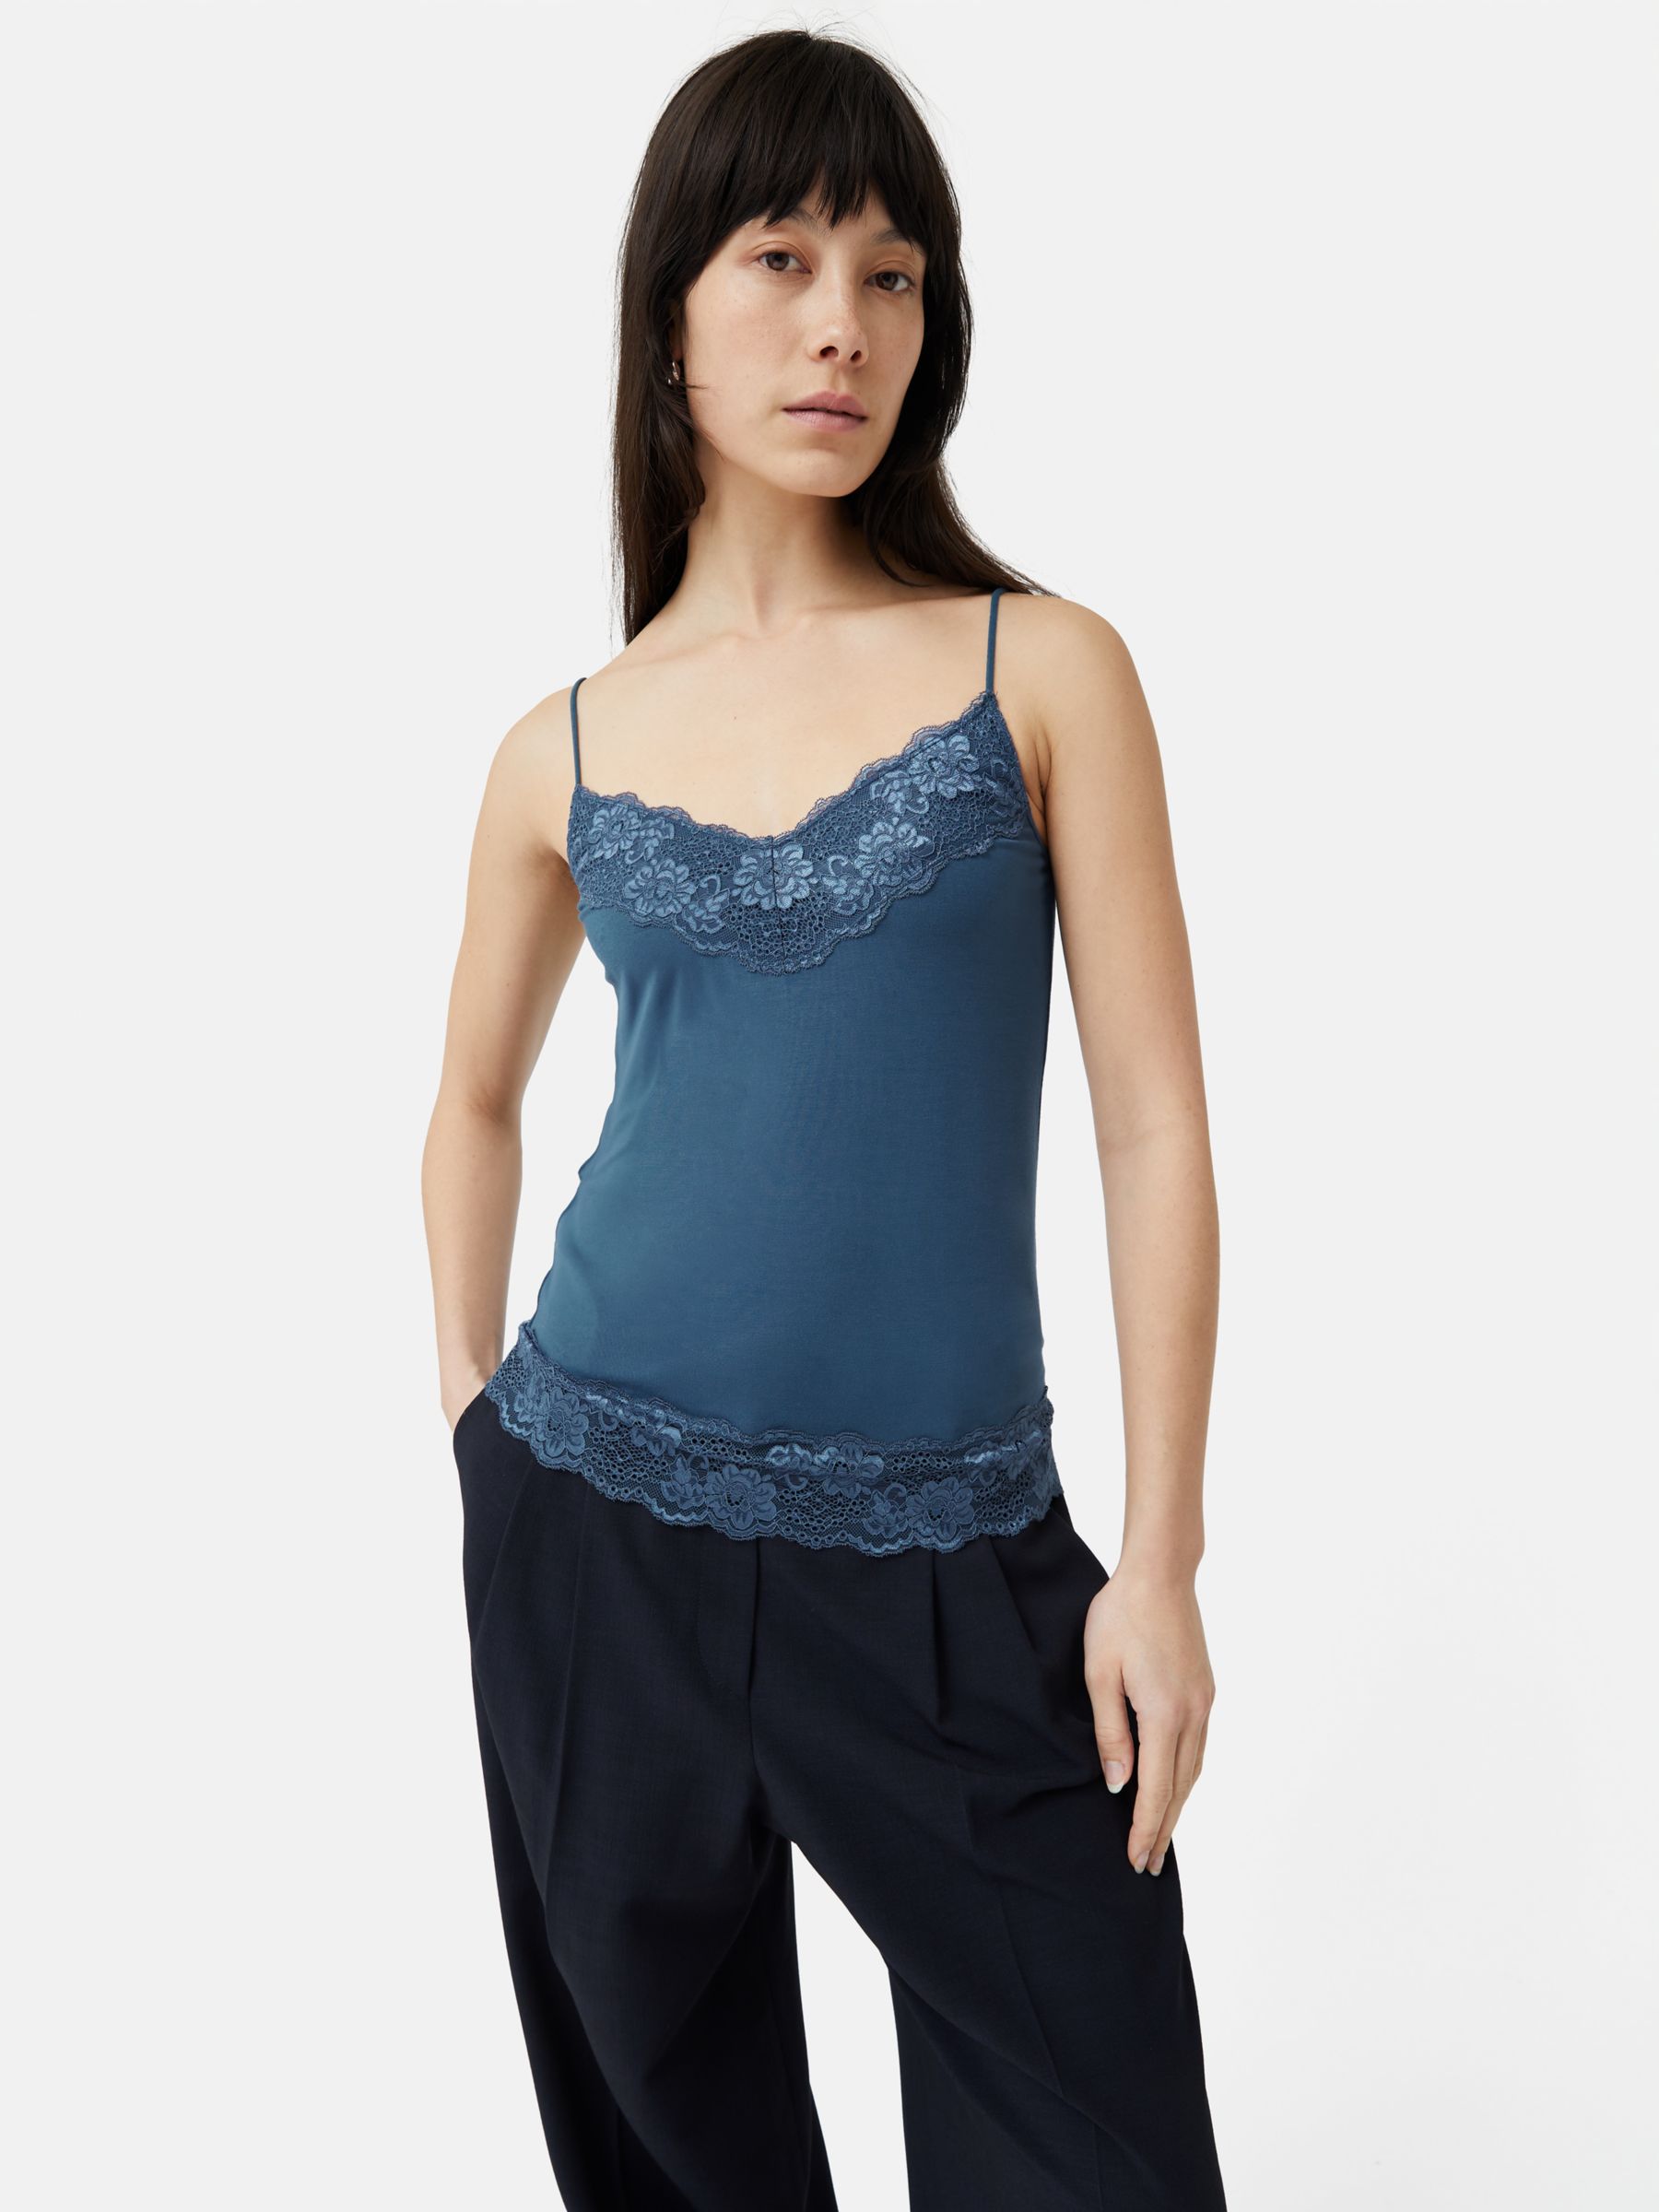 Women Lace Camisole with Built in Bra Sleeveless Scalloped Trim